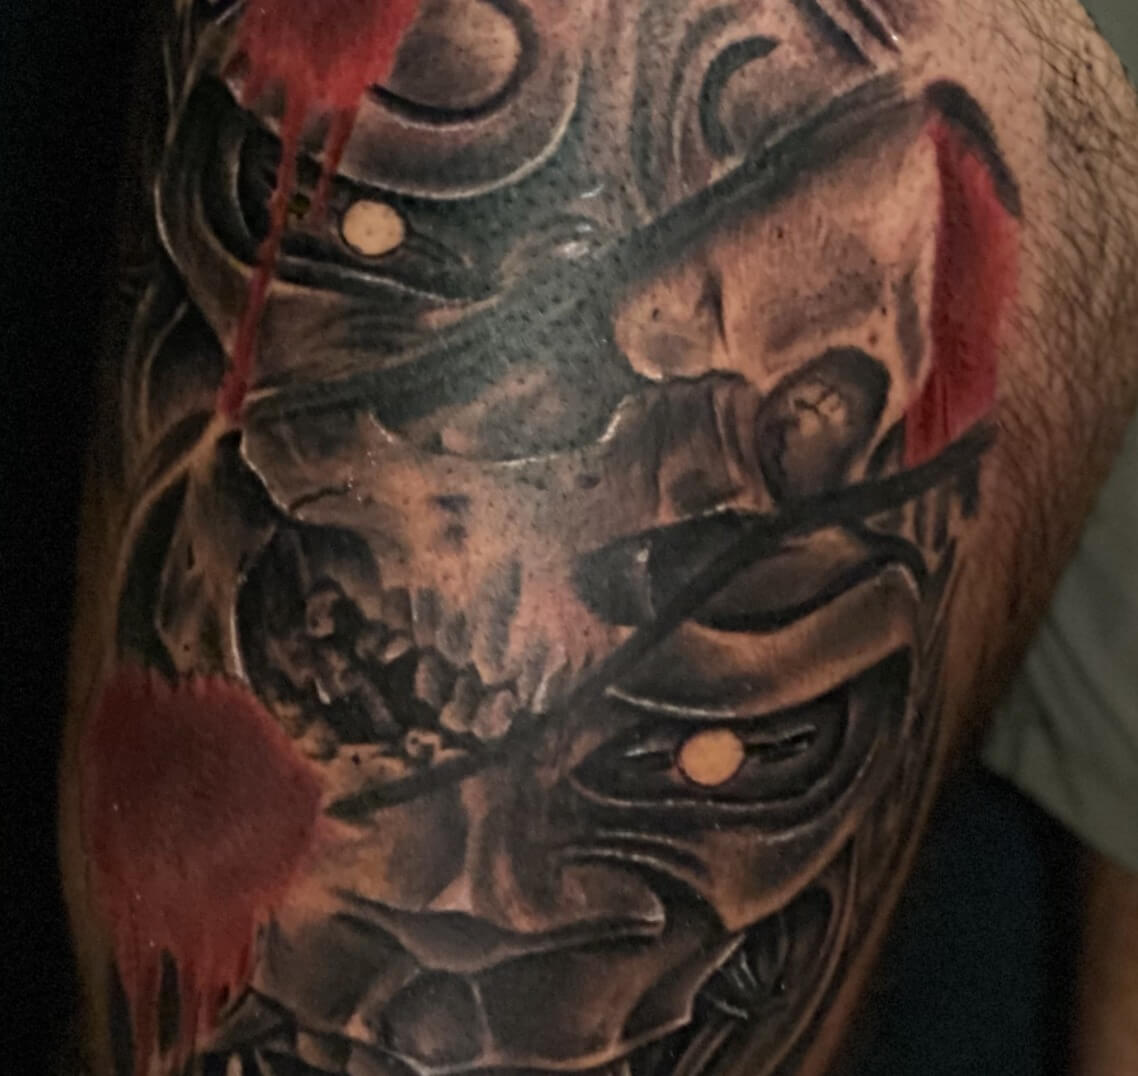 Oni Mask & Skull by DB.Wyte, A Tattoo Artist In Atlanta at Iron Palm Tattoos. Call 404-973-7828 or stop by for free consultation. Walk-Ins are welcome.